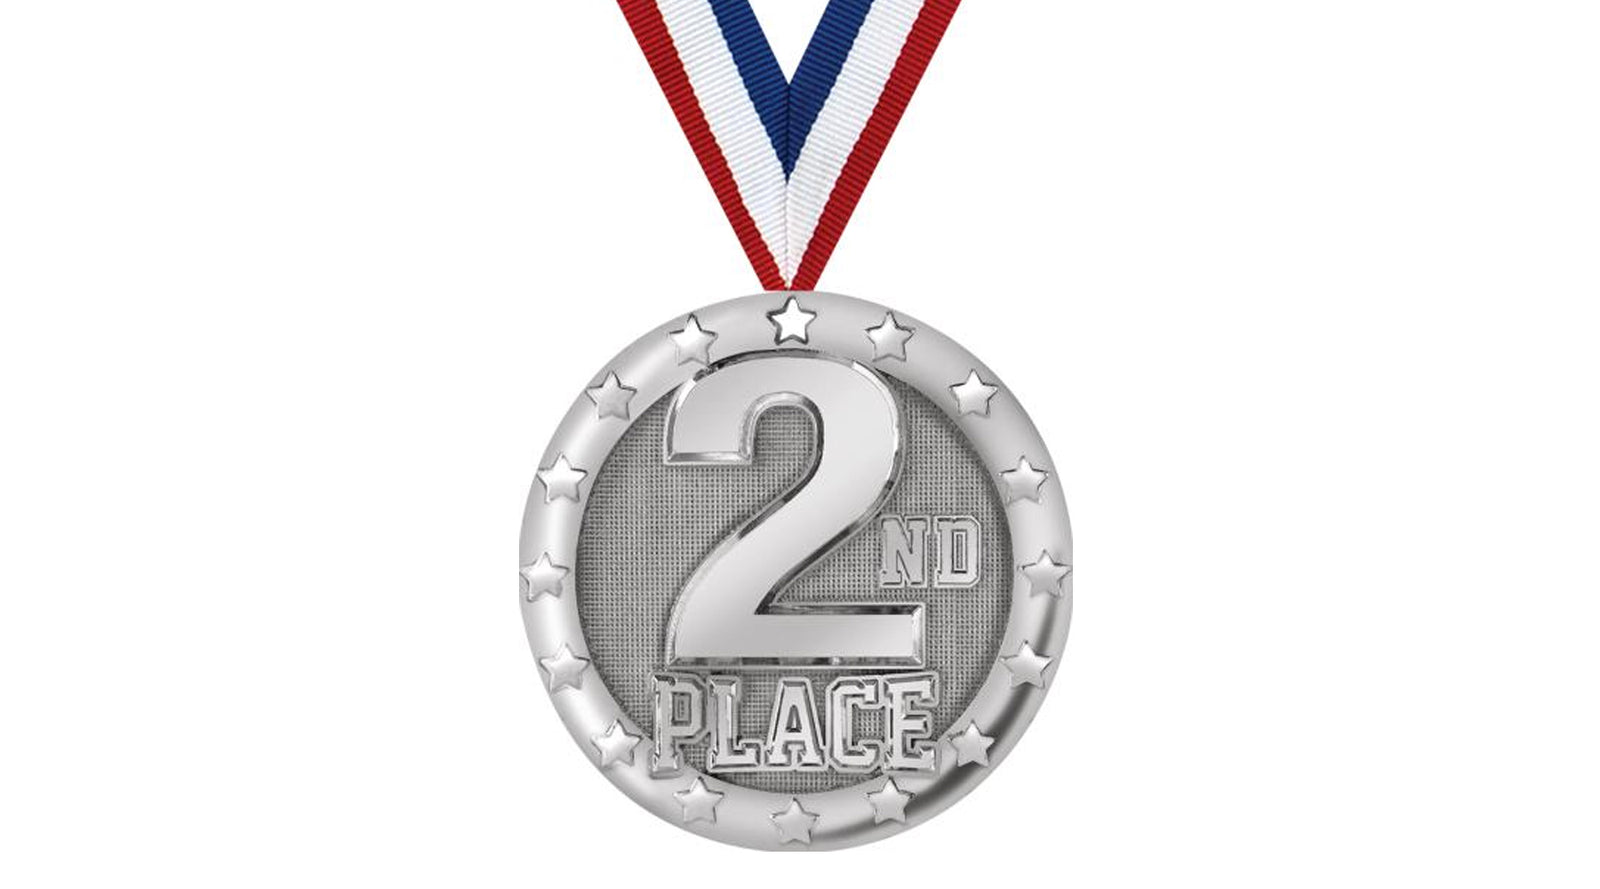 2nd Place Awards Are Glorified Participation Trophies